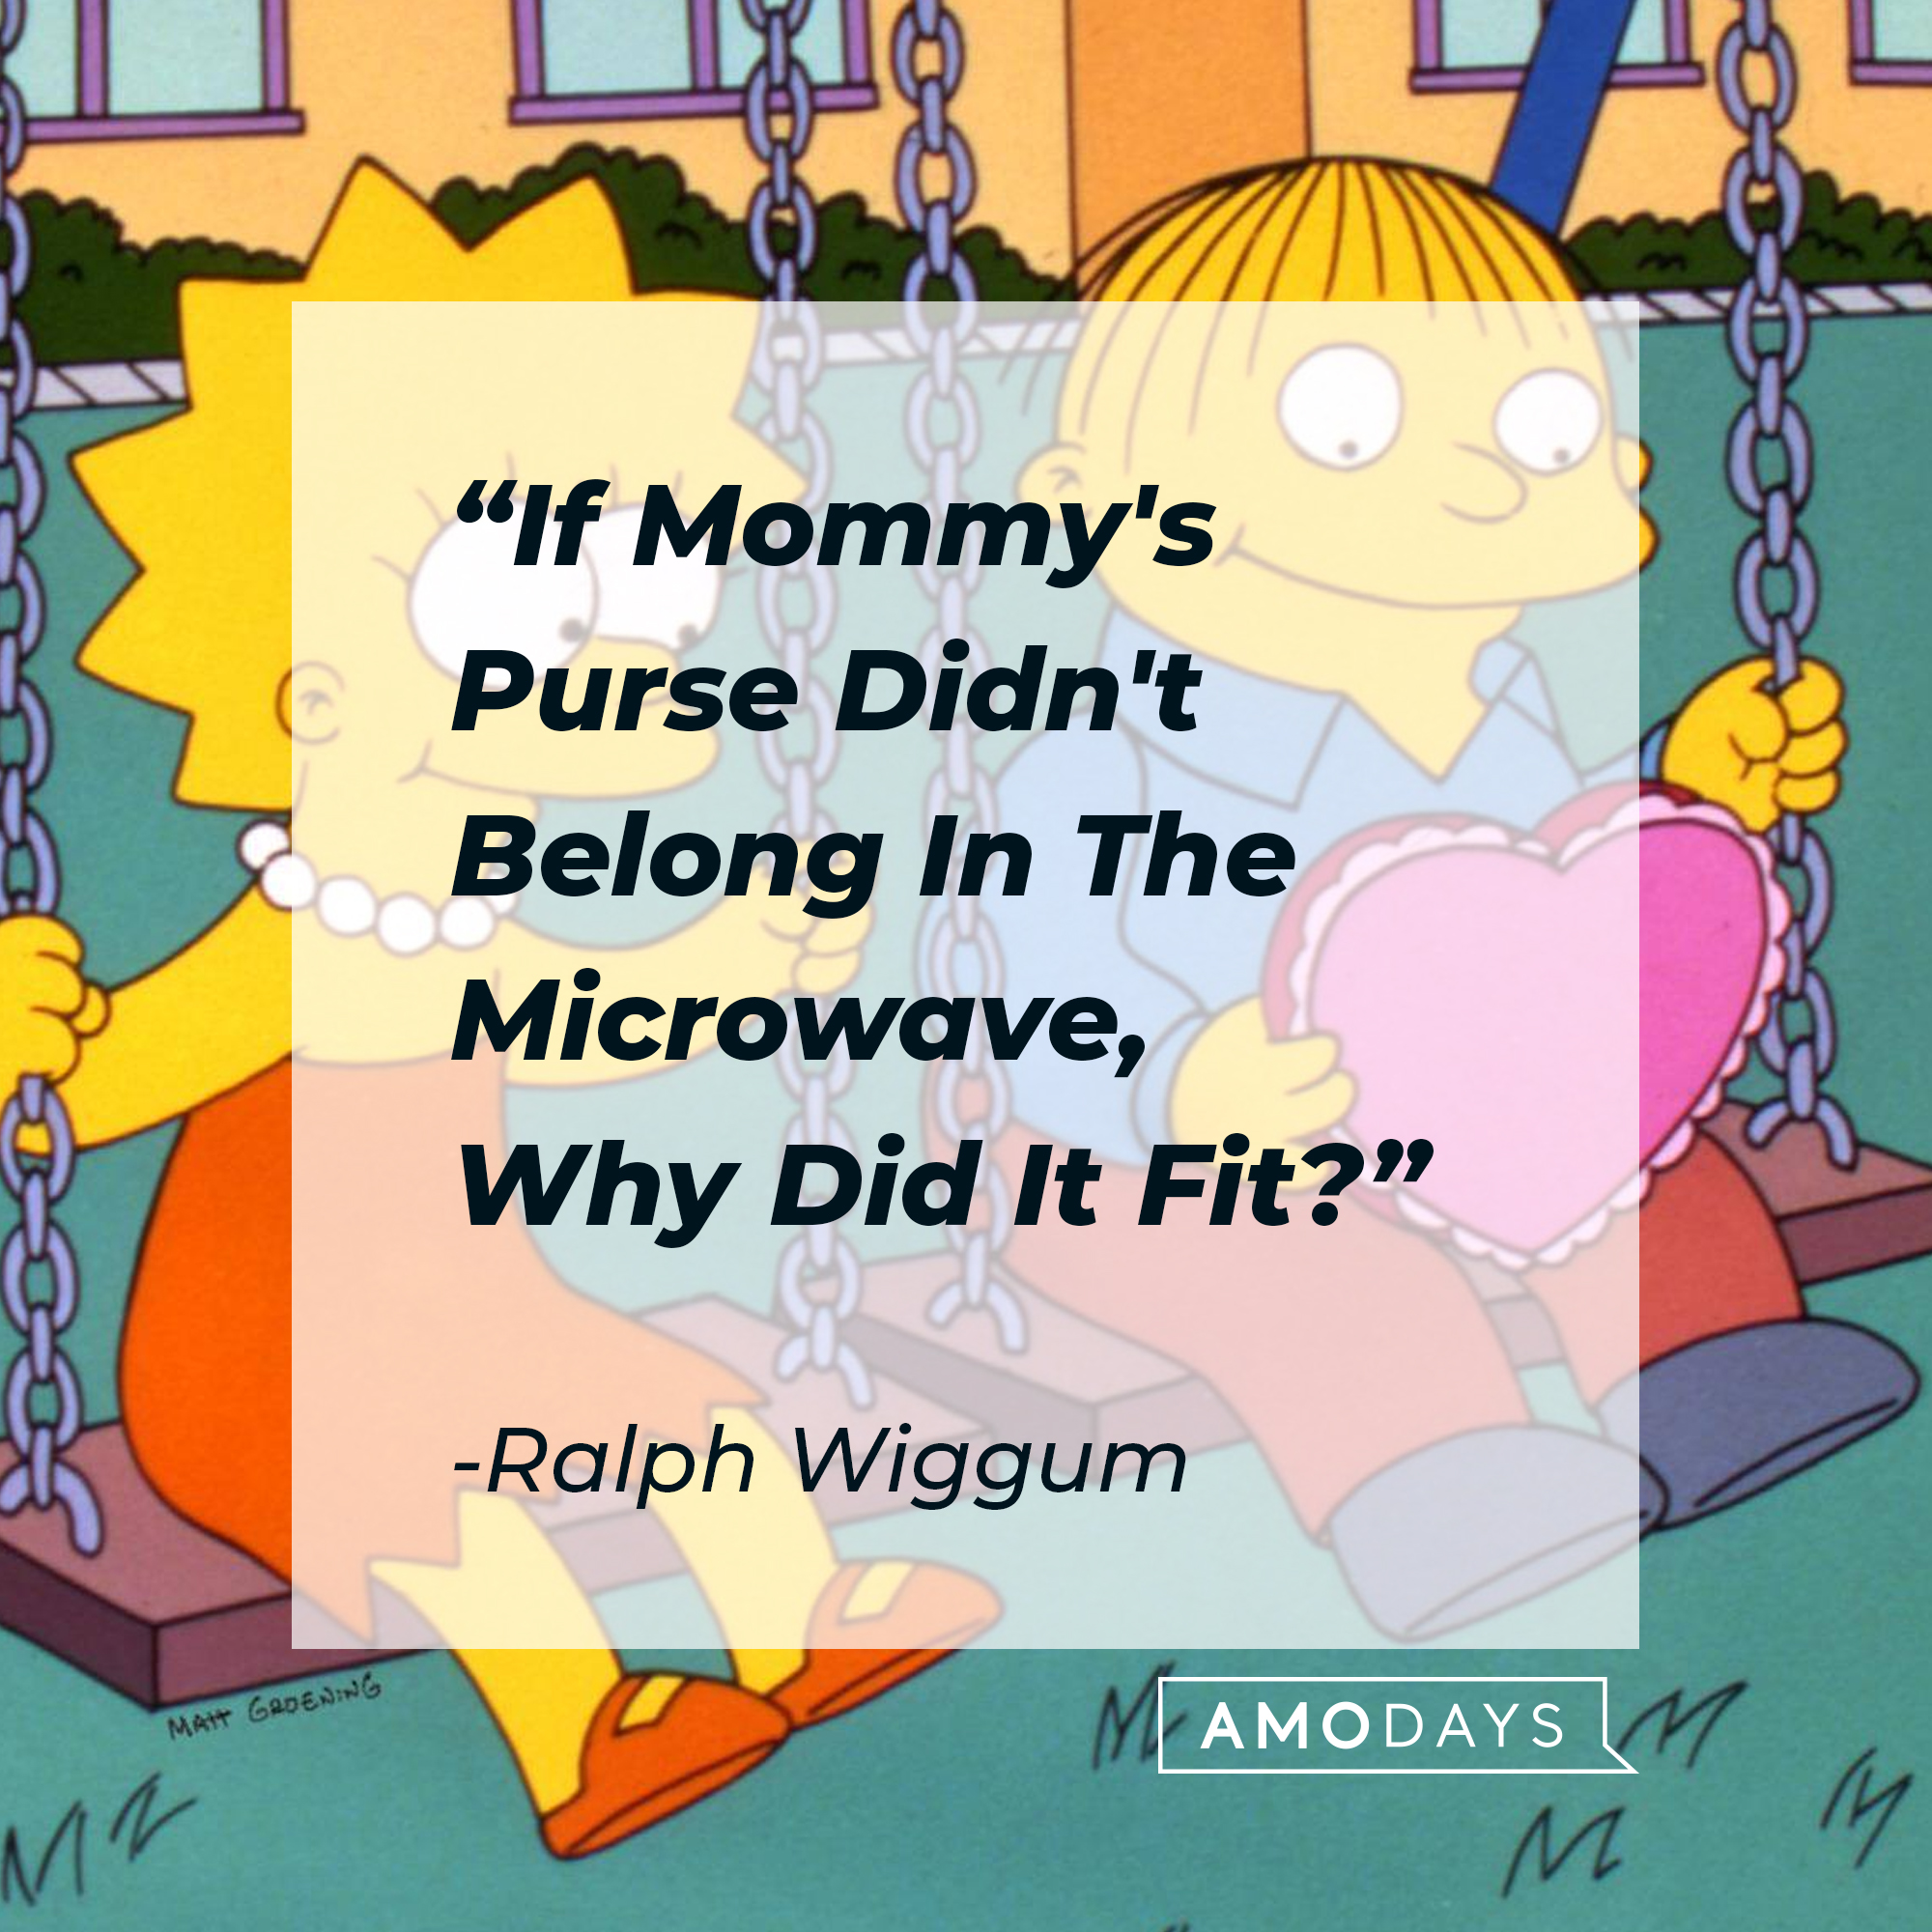 Ralph Wiggum's quote: "If Mommy's Purse Didn't Belong In The Microwave, Why Did It Fit?"